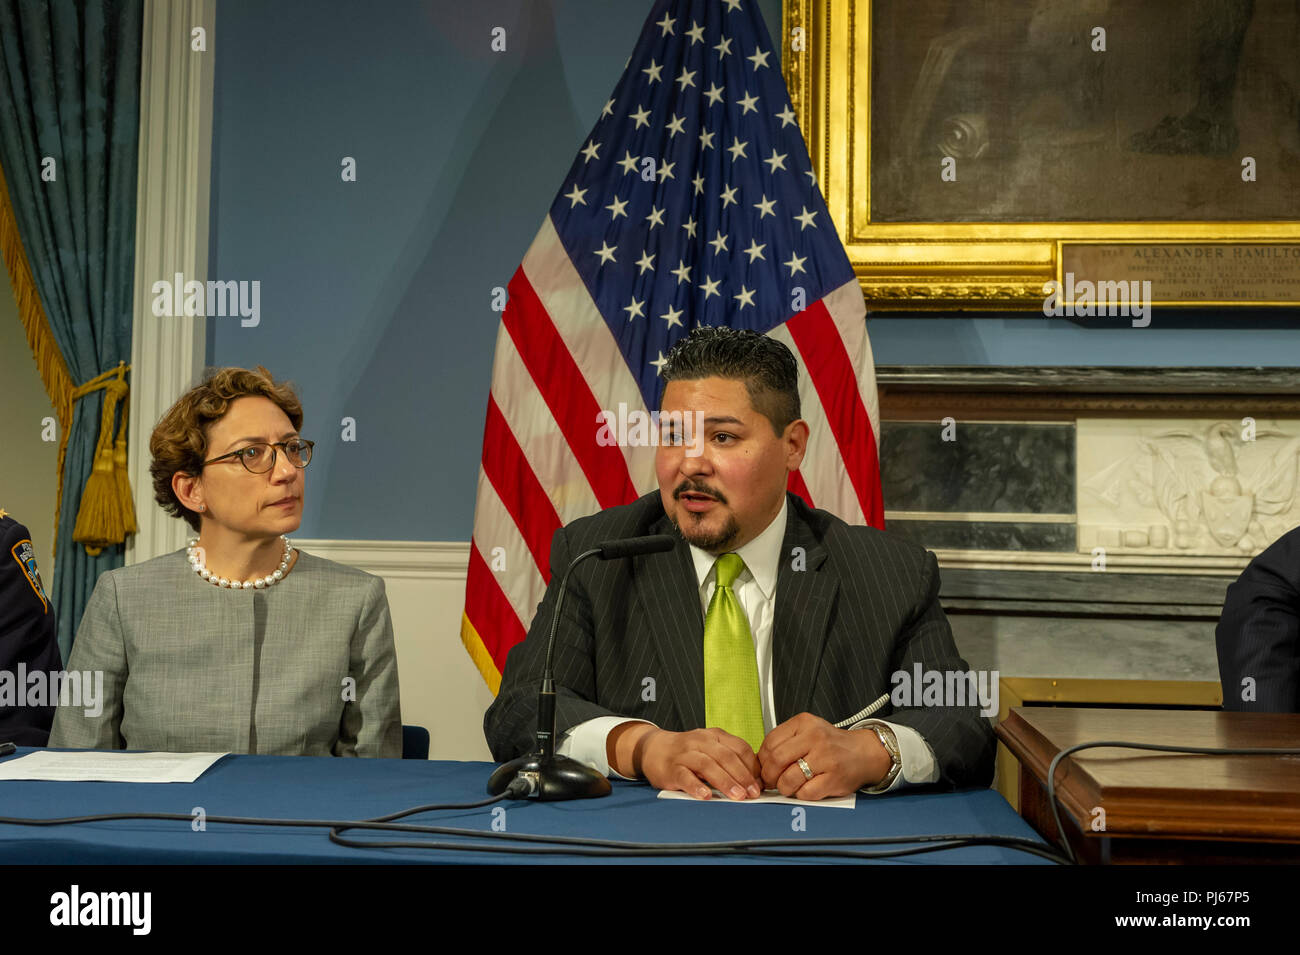 New York Department of Education Schools Chancellor Richard Carranza, speaks at a bill signing for Intro. 1089, which preserves and expands the use of speed cameras near schools where speeding is prevalent in the Blue Room in New York City Hall, on Tuesday September 4, 2018 in New York. (Â© Frances M. Roberts) Credit: Frances Roberts/Alamy Live News Stock Photo